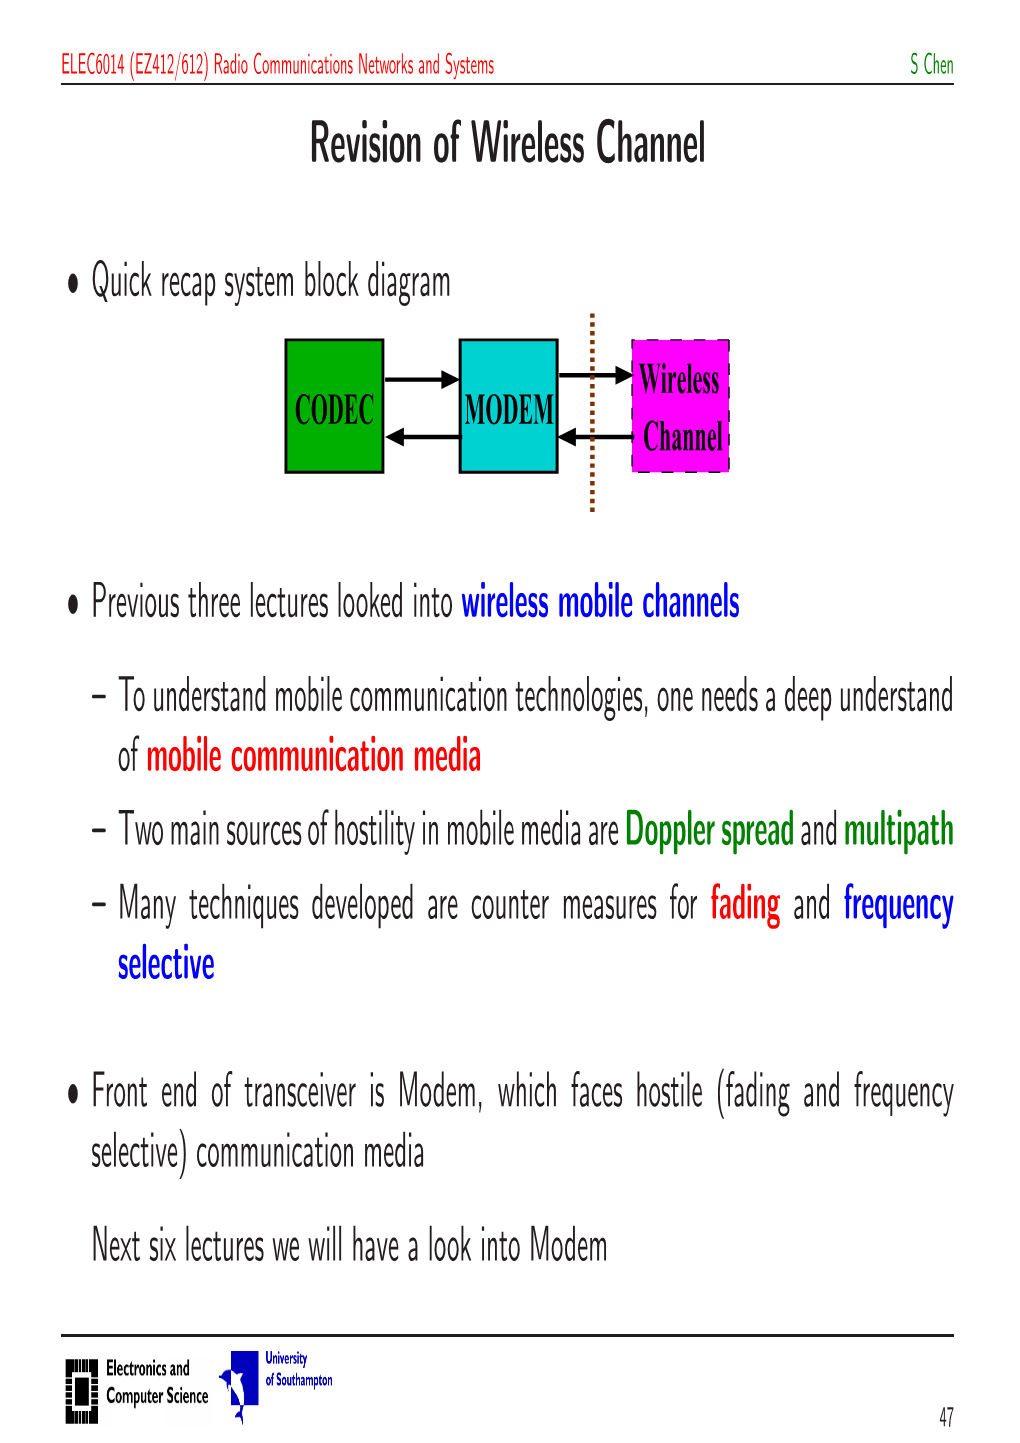 Revision of Wireless Channel